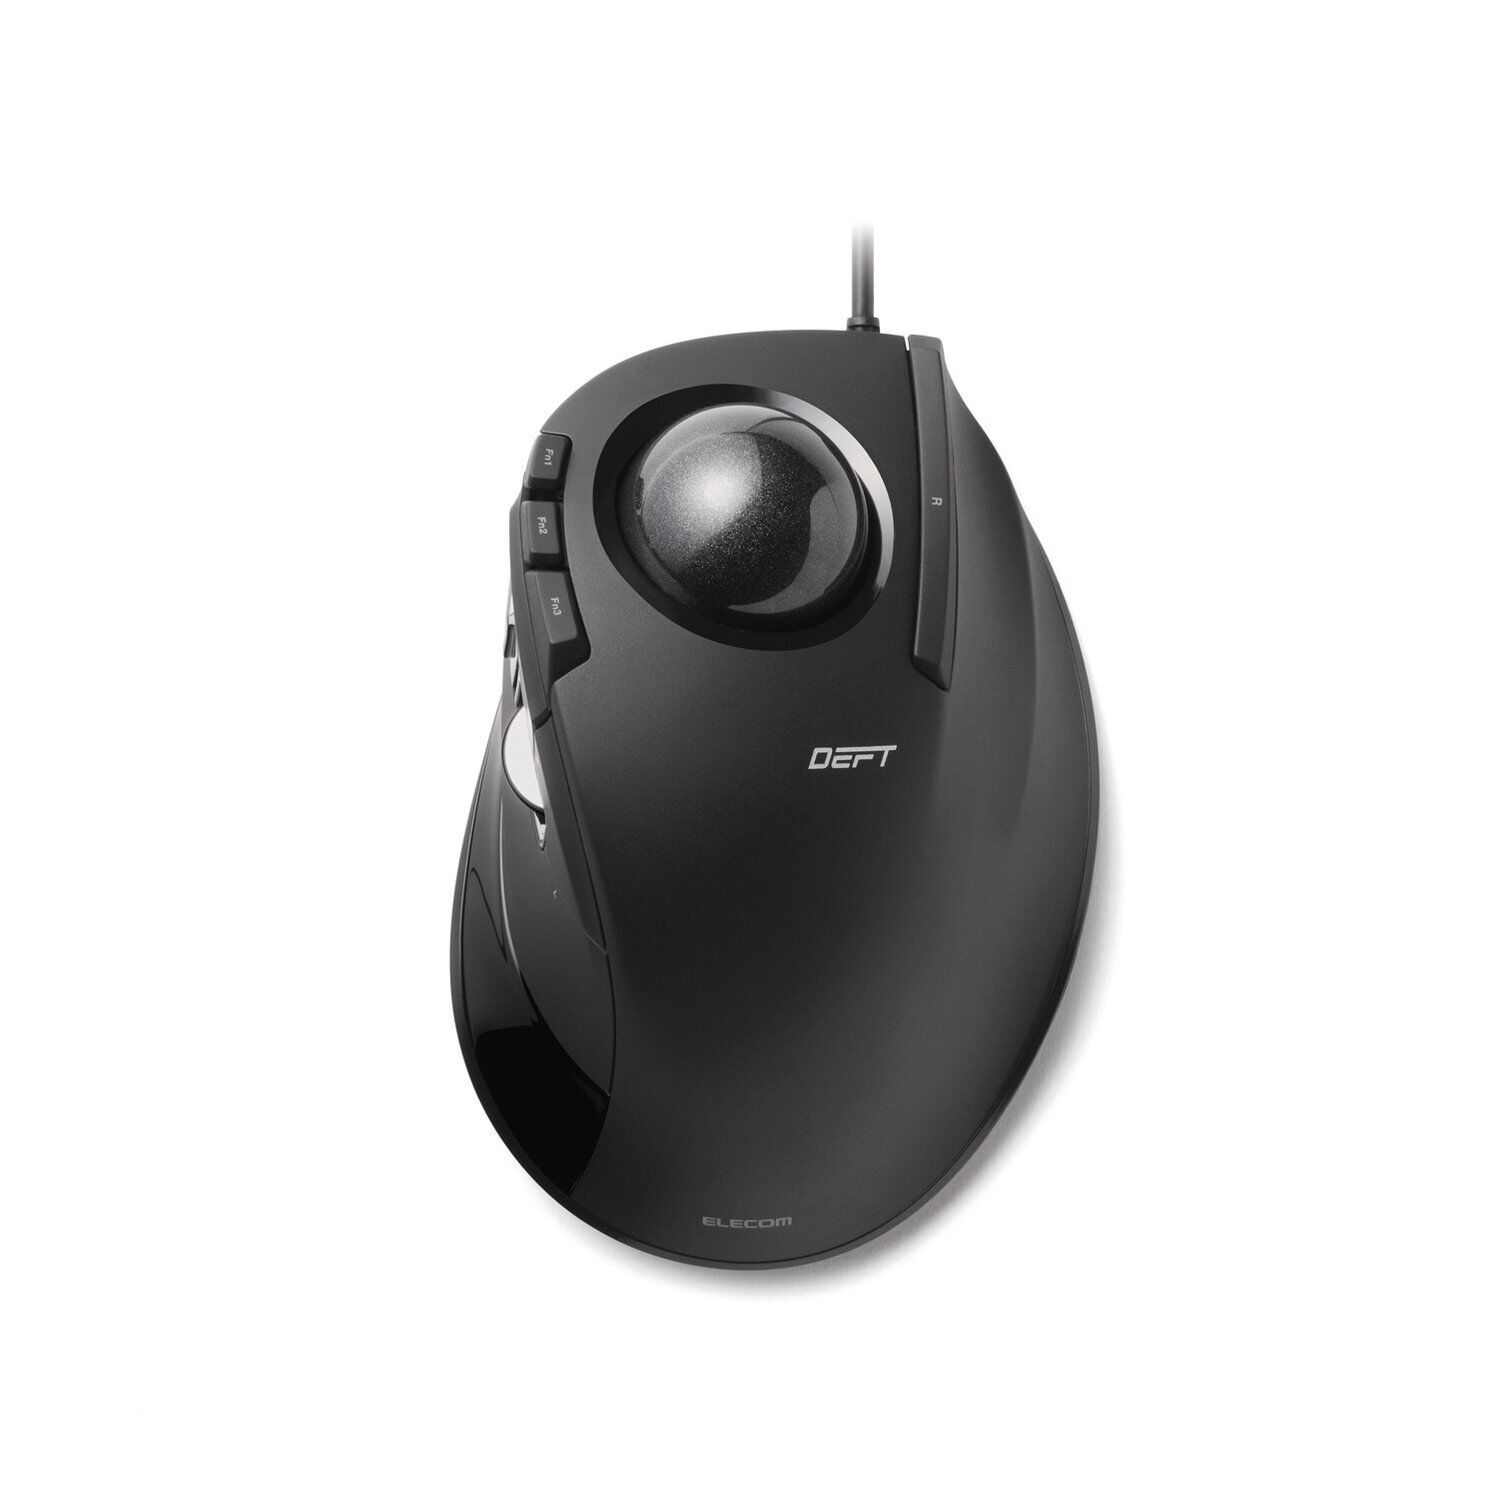 ELECOM DEFT Trackball Mouse, Wired, Finger Control, 8-Button Function with Smo